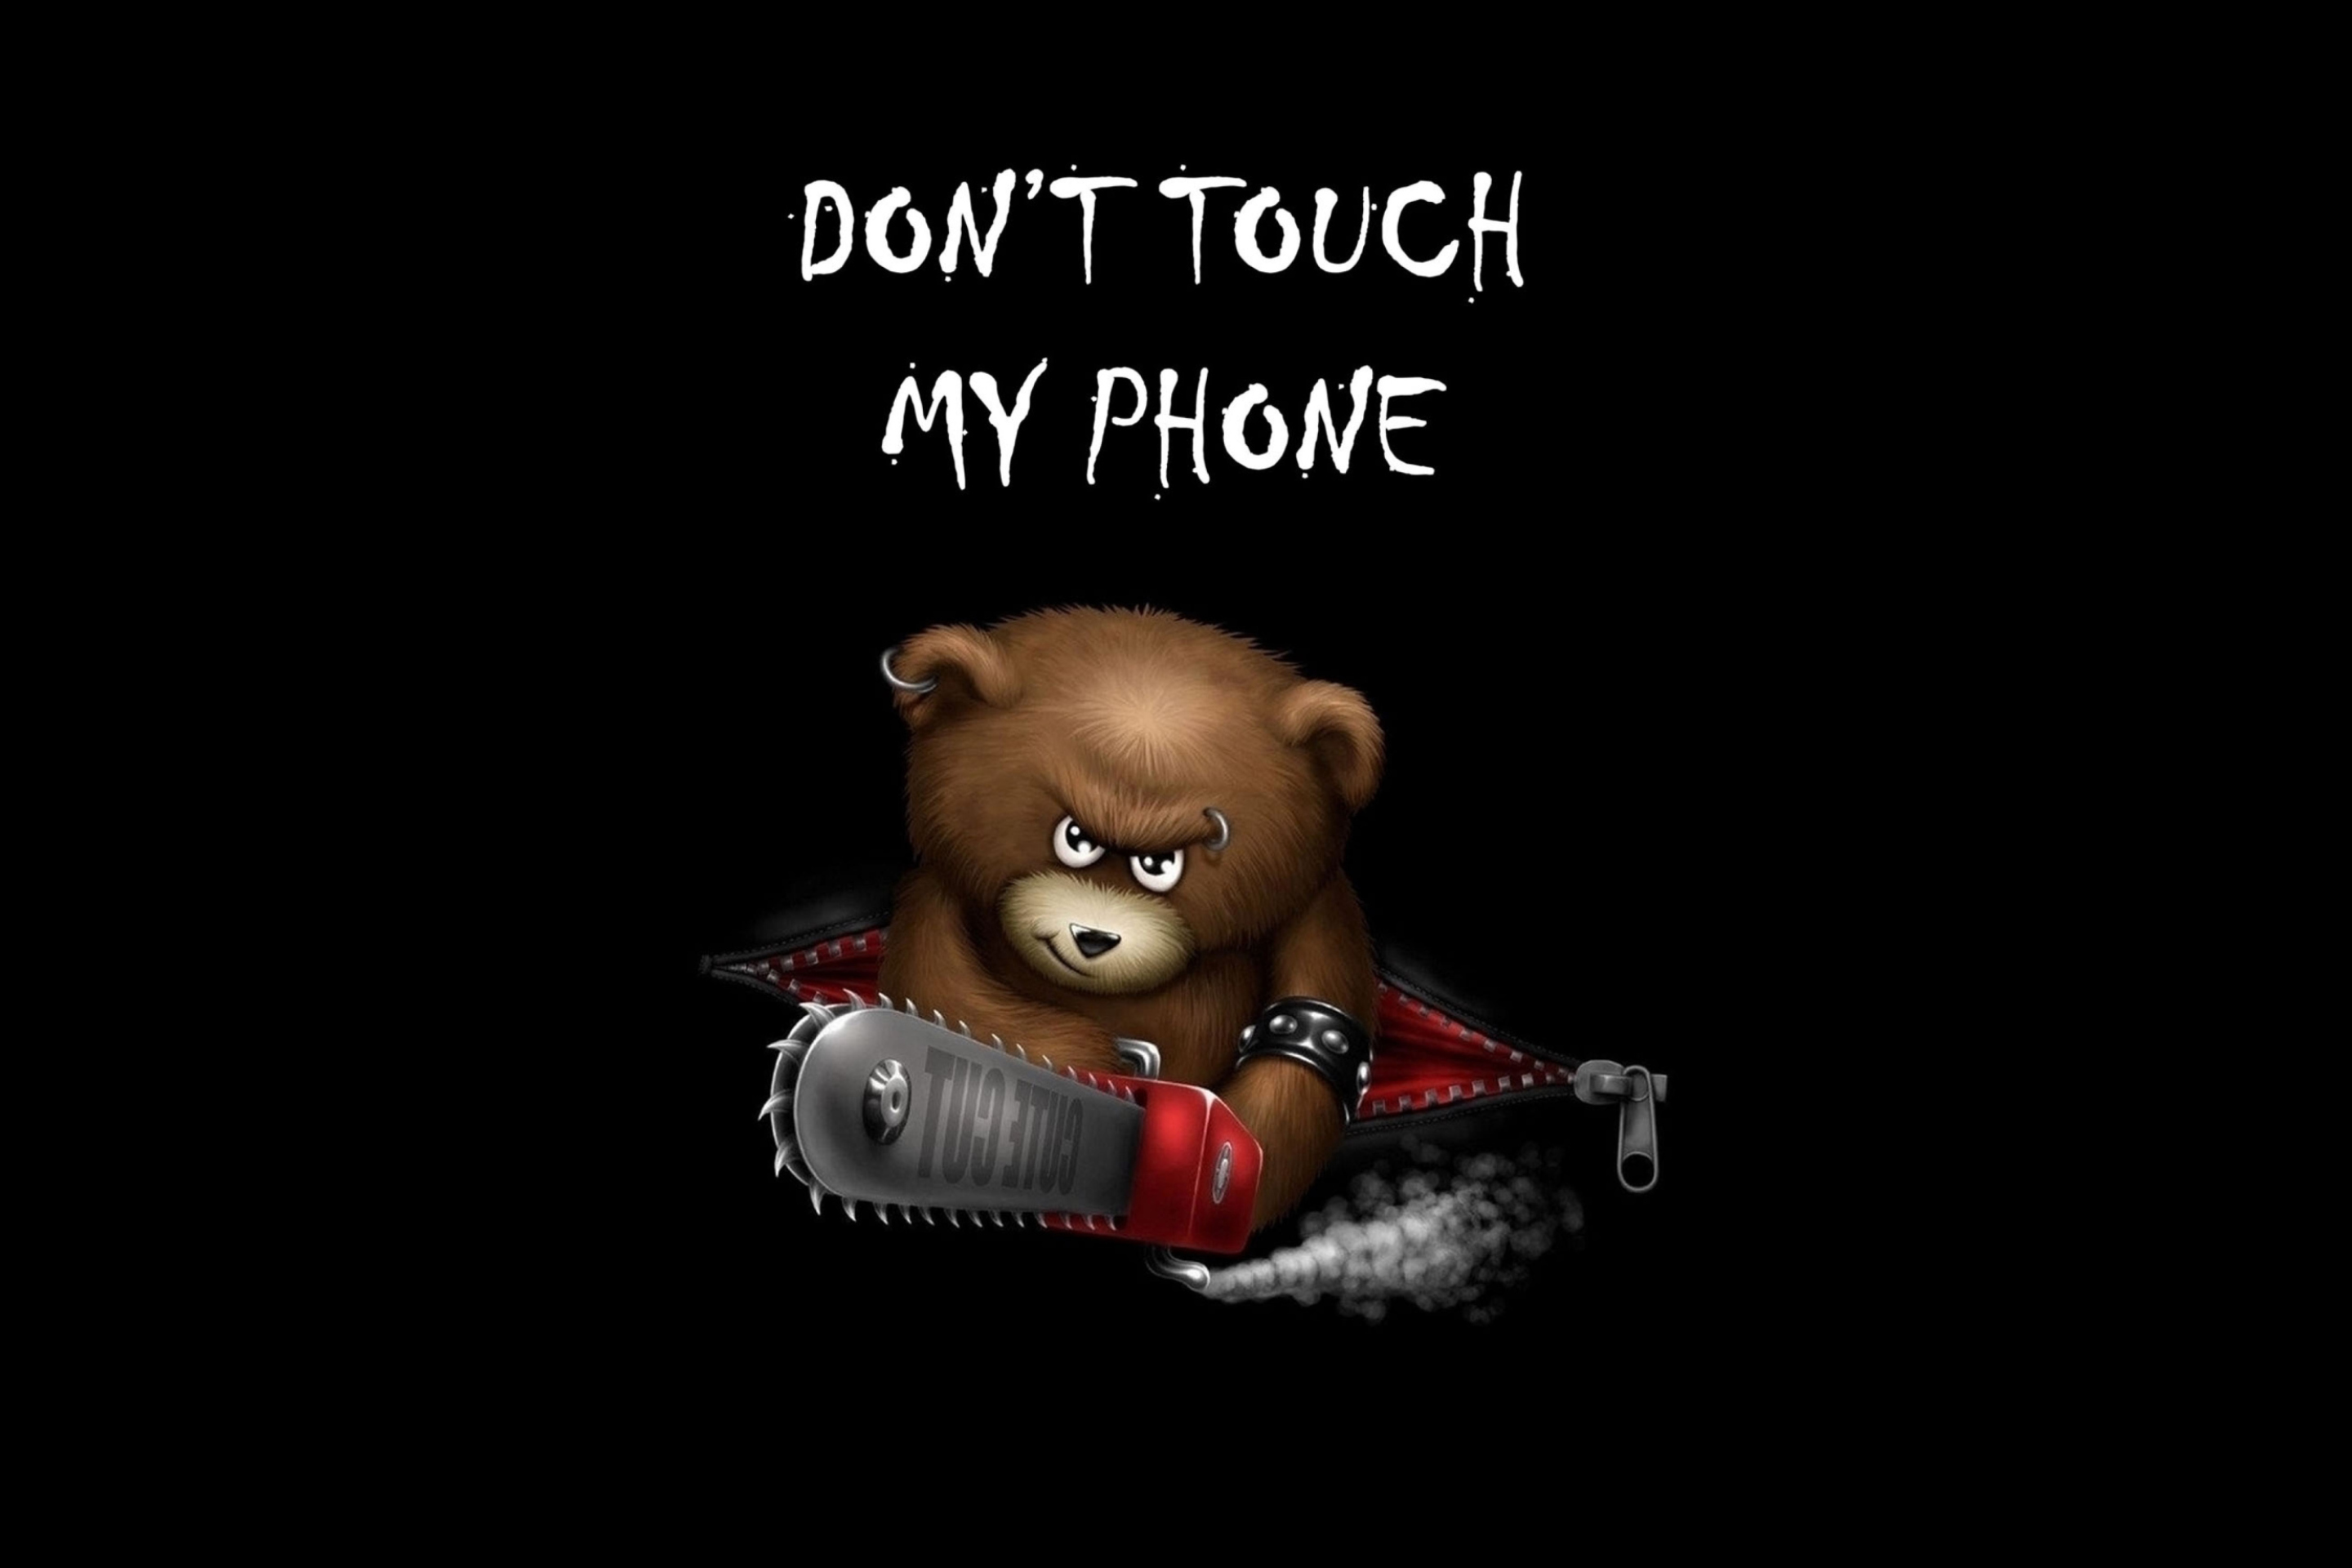 Dont Touch My Phone wallpaper 2880x1920